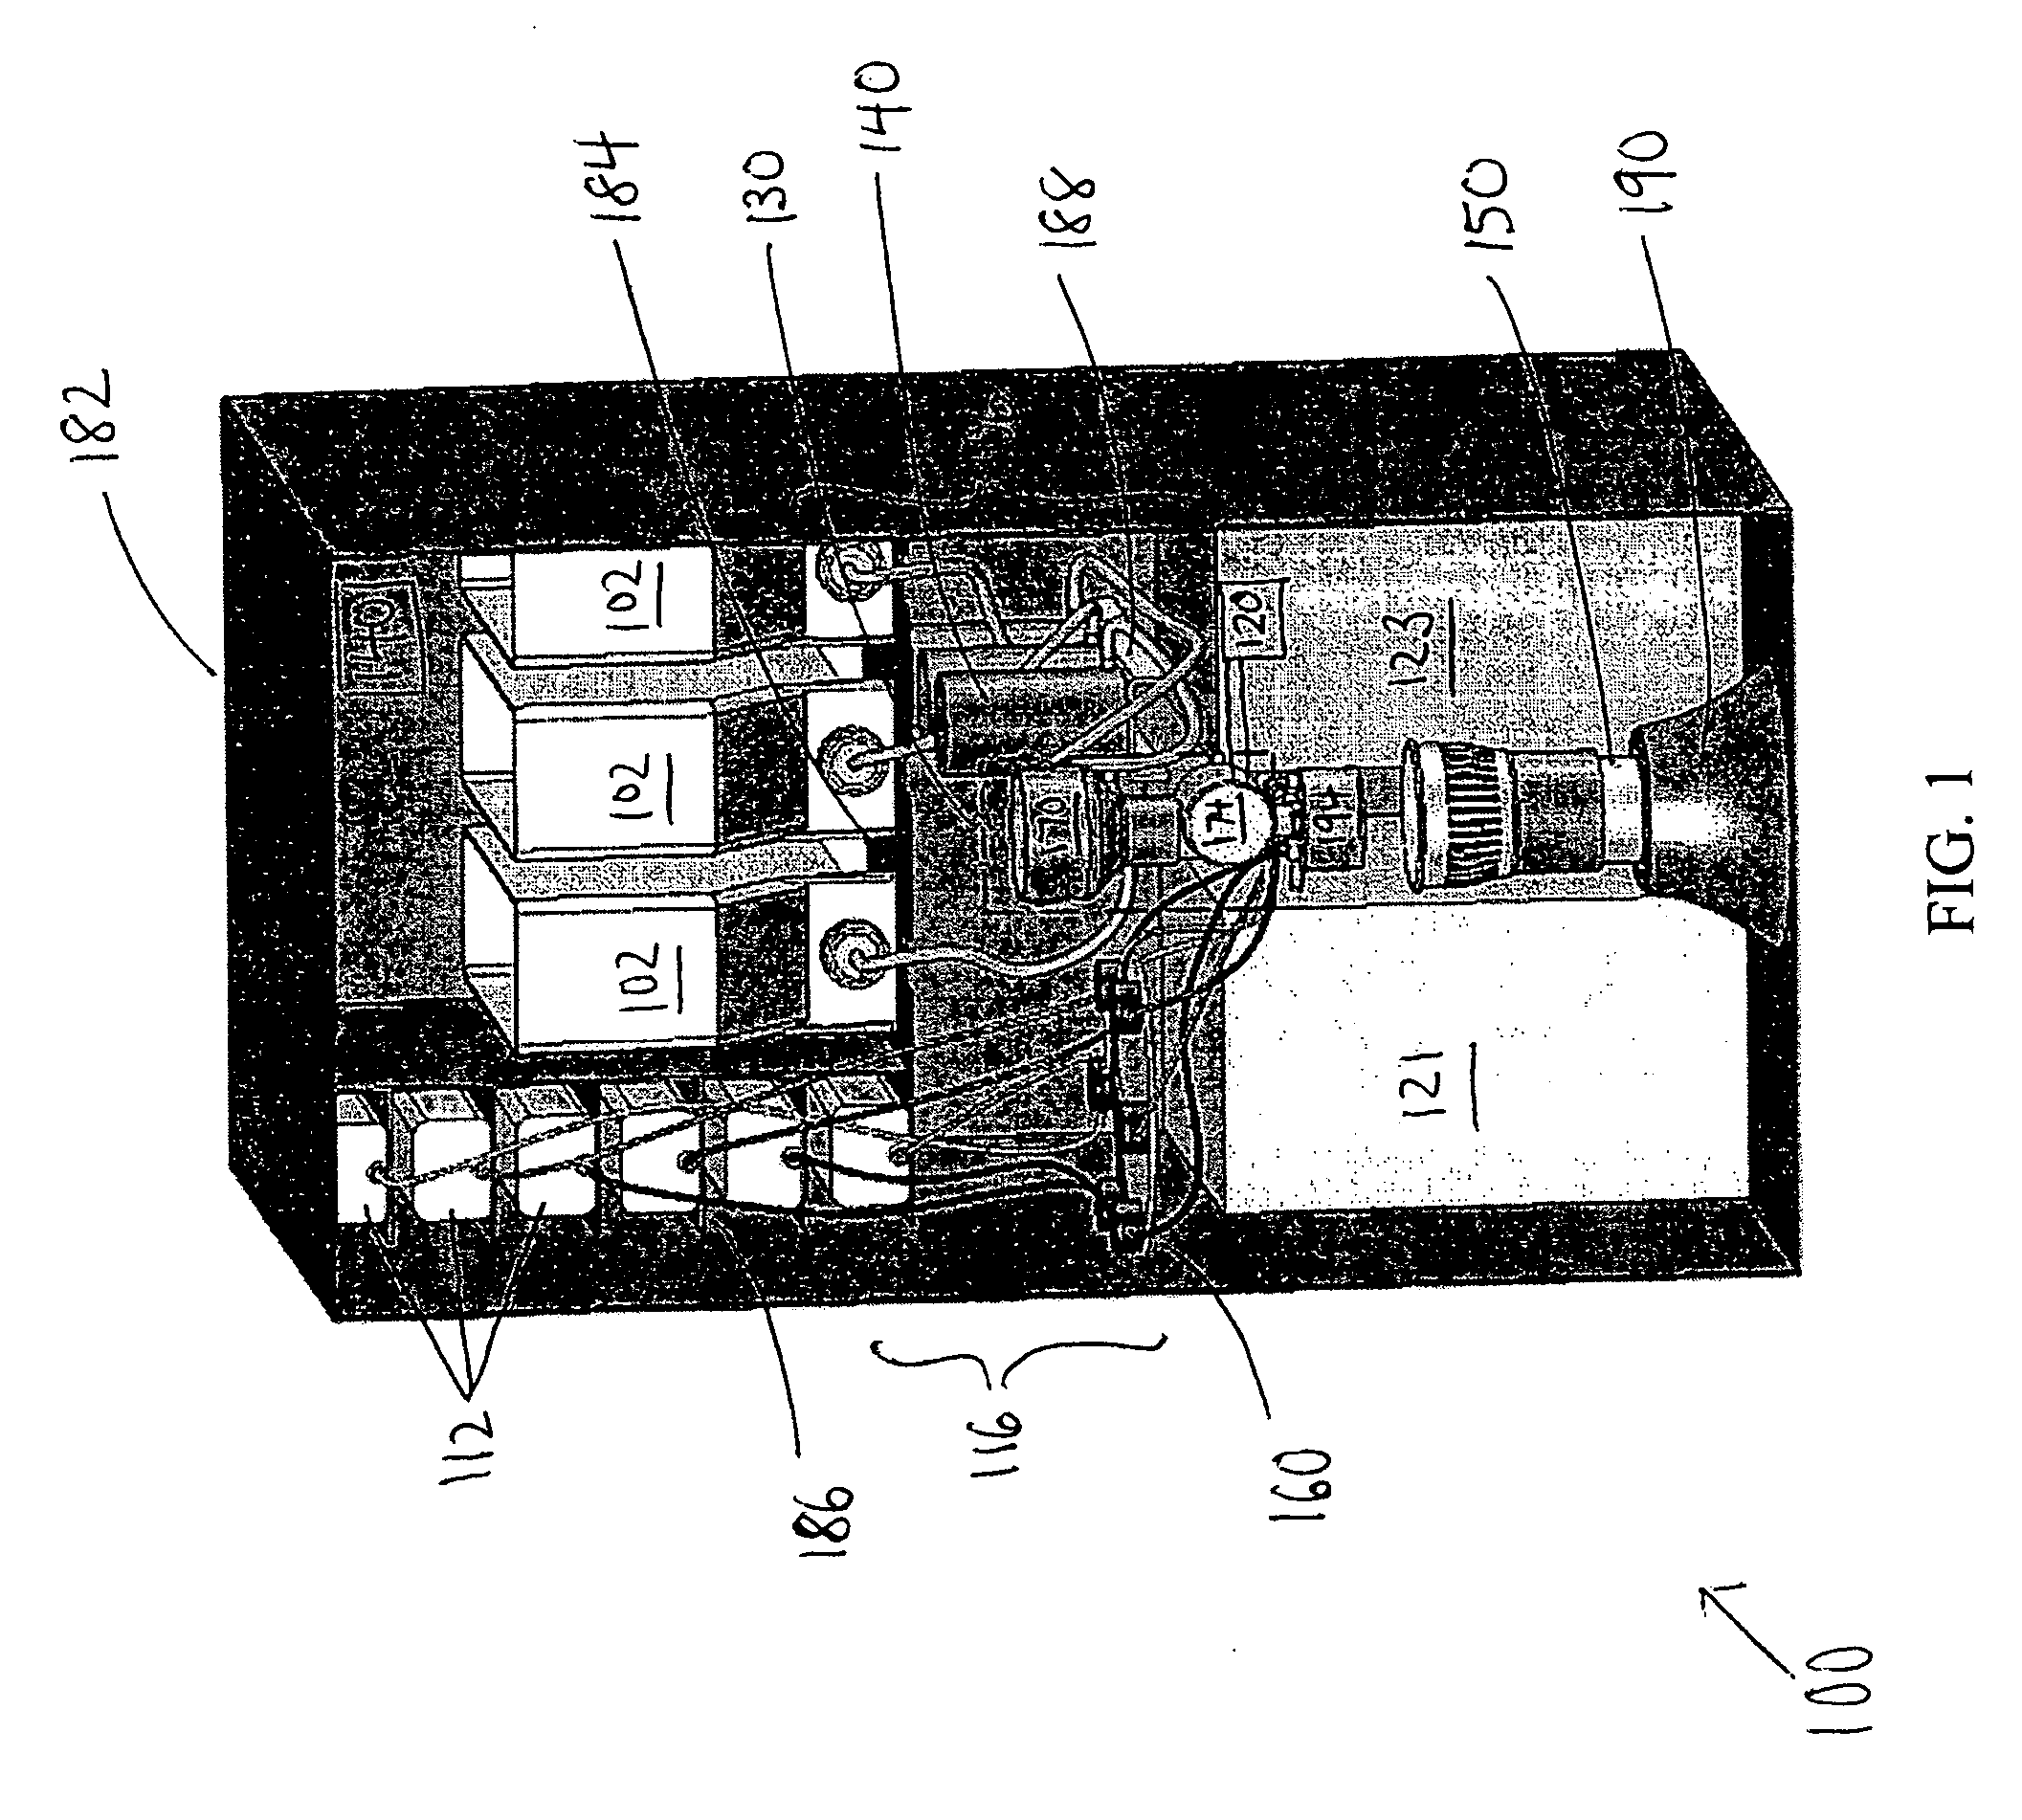 Method for delivering hot and cold beverages on demand in a variety of flavorings and nutritional additives